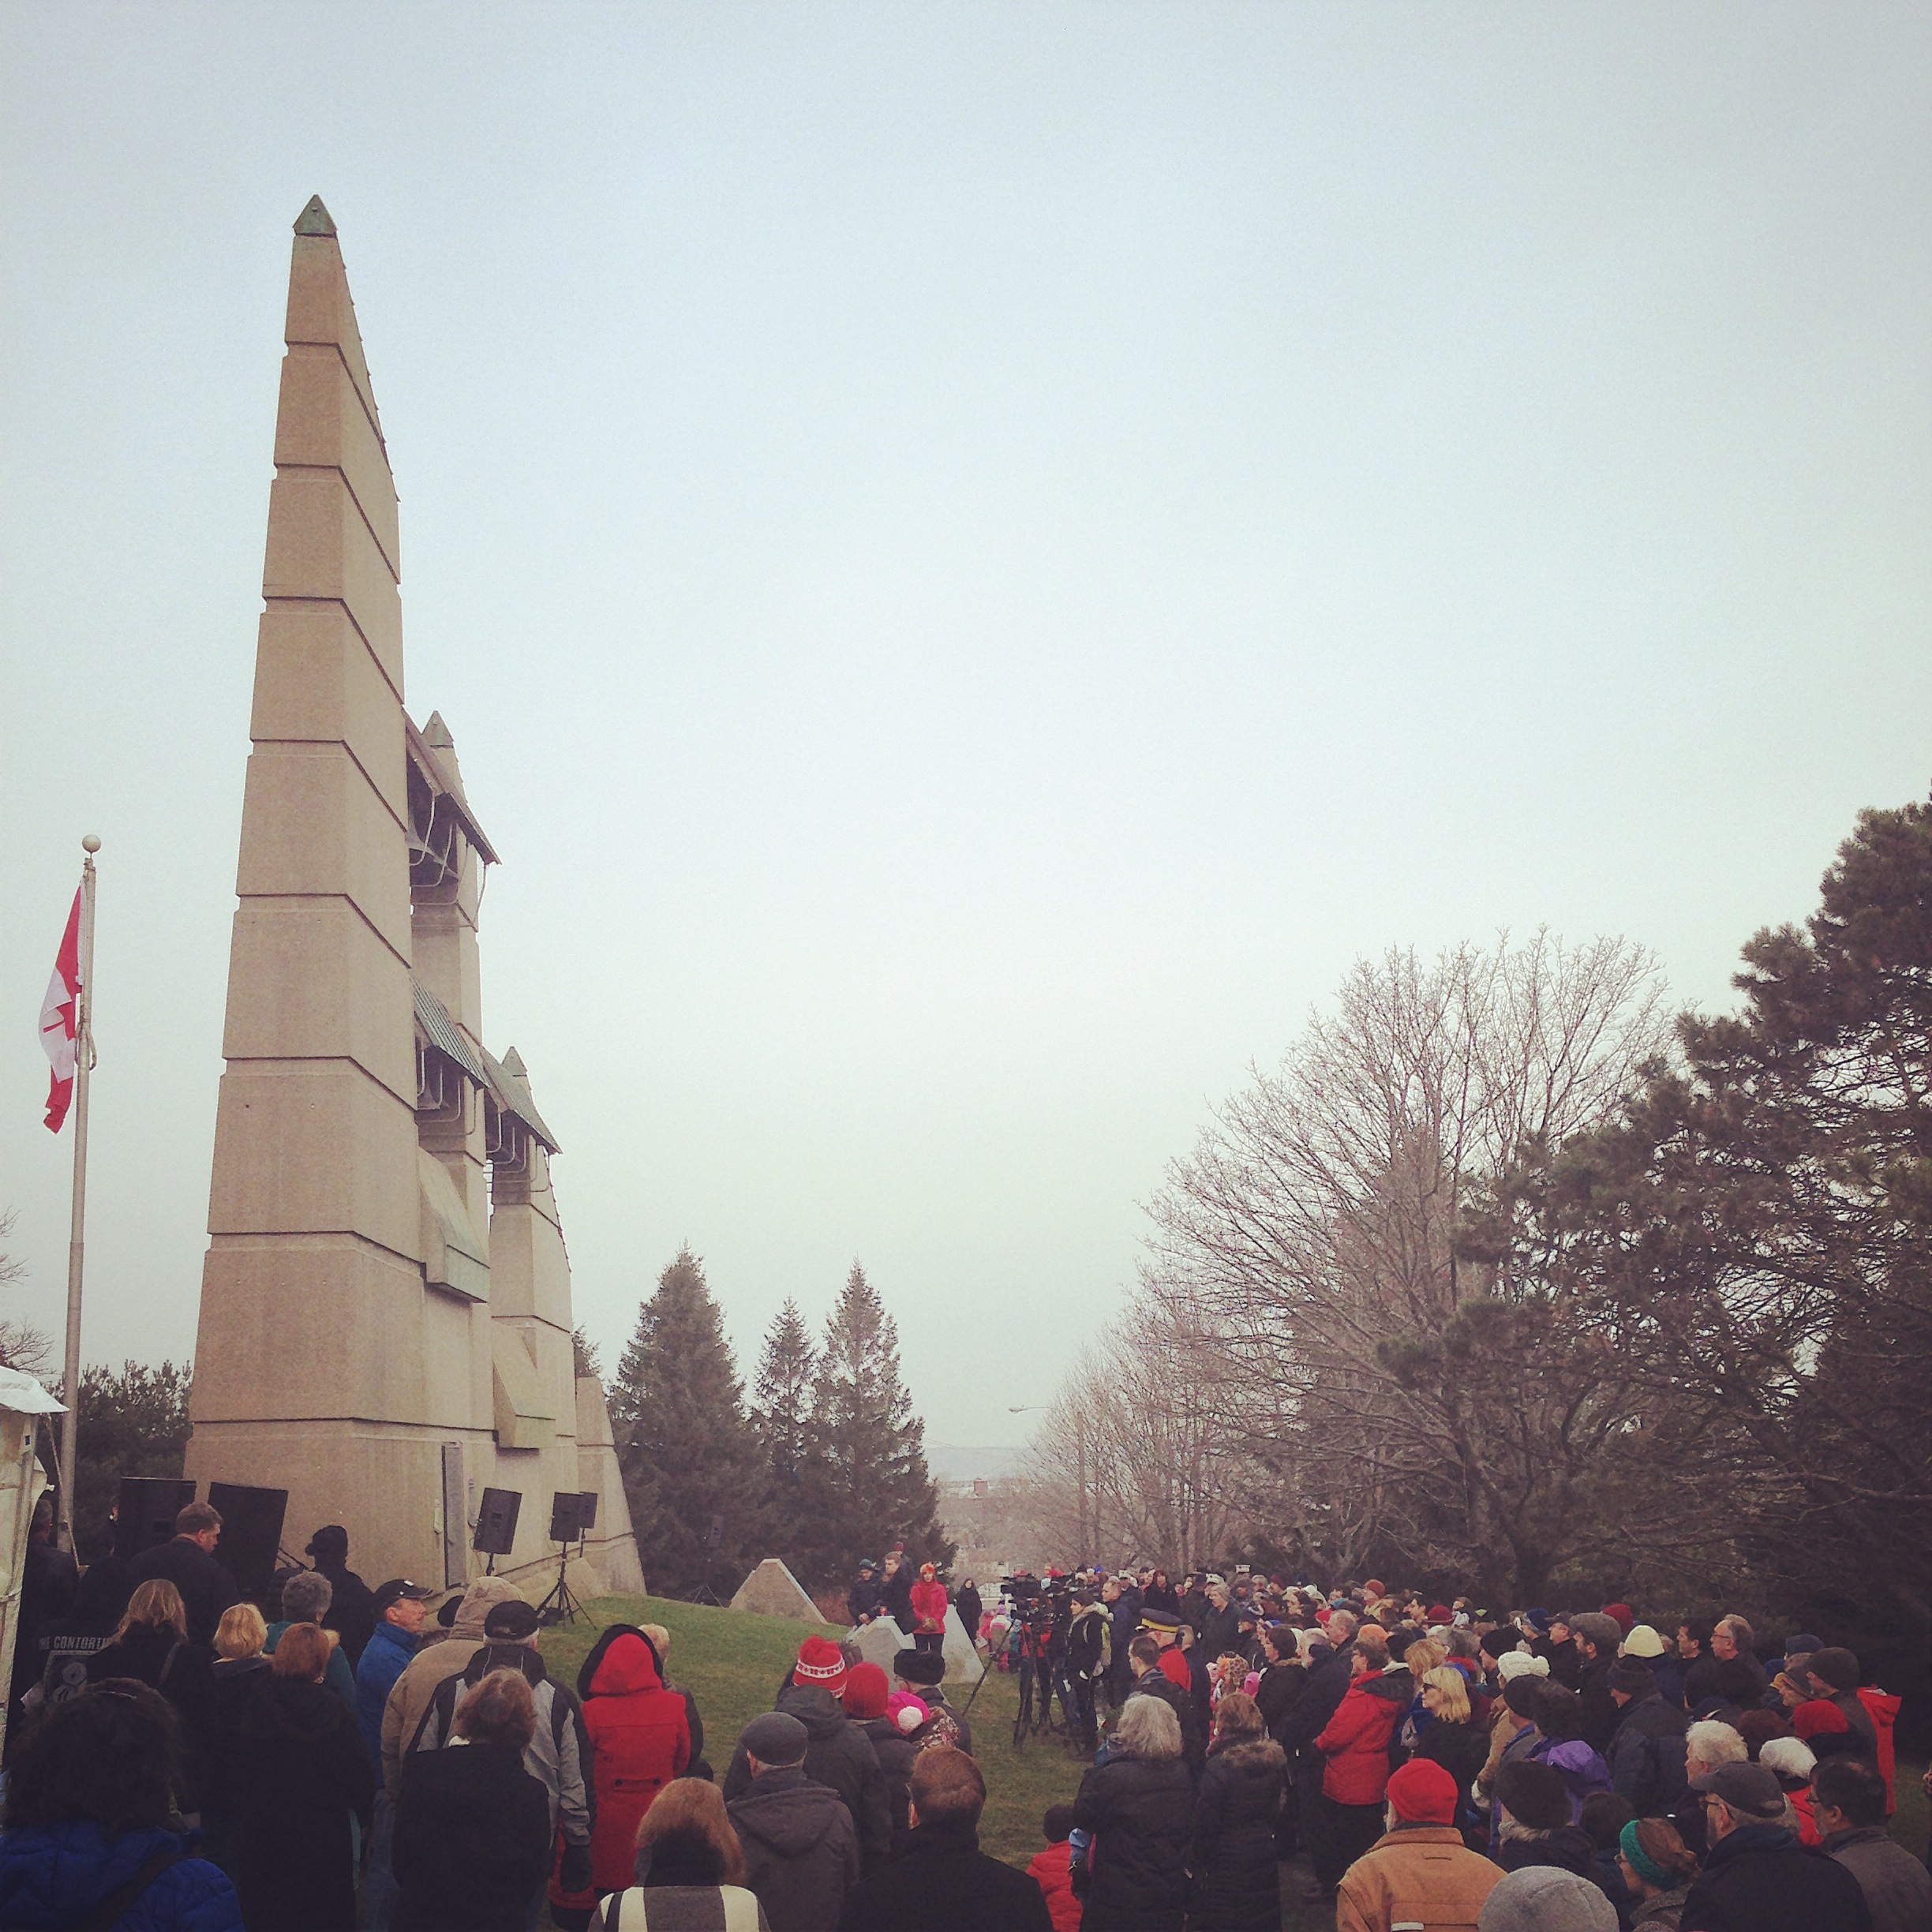 A photo of the Halifax Explosion Memorial Service at Fort Needham Park, with Memorial Bell Tower in the background